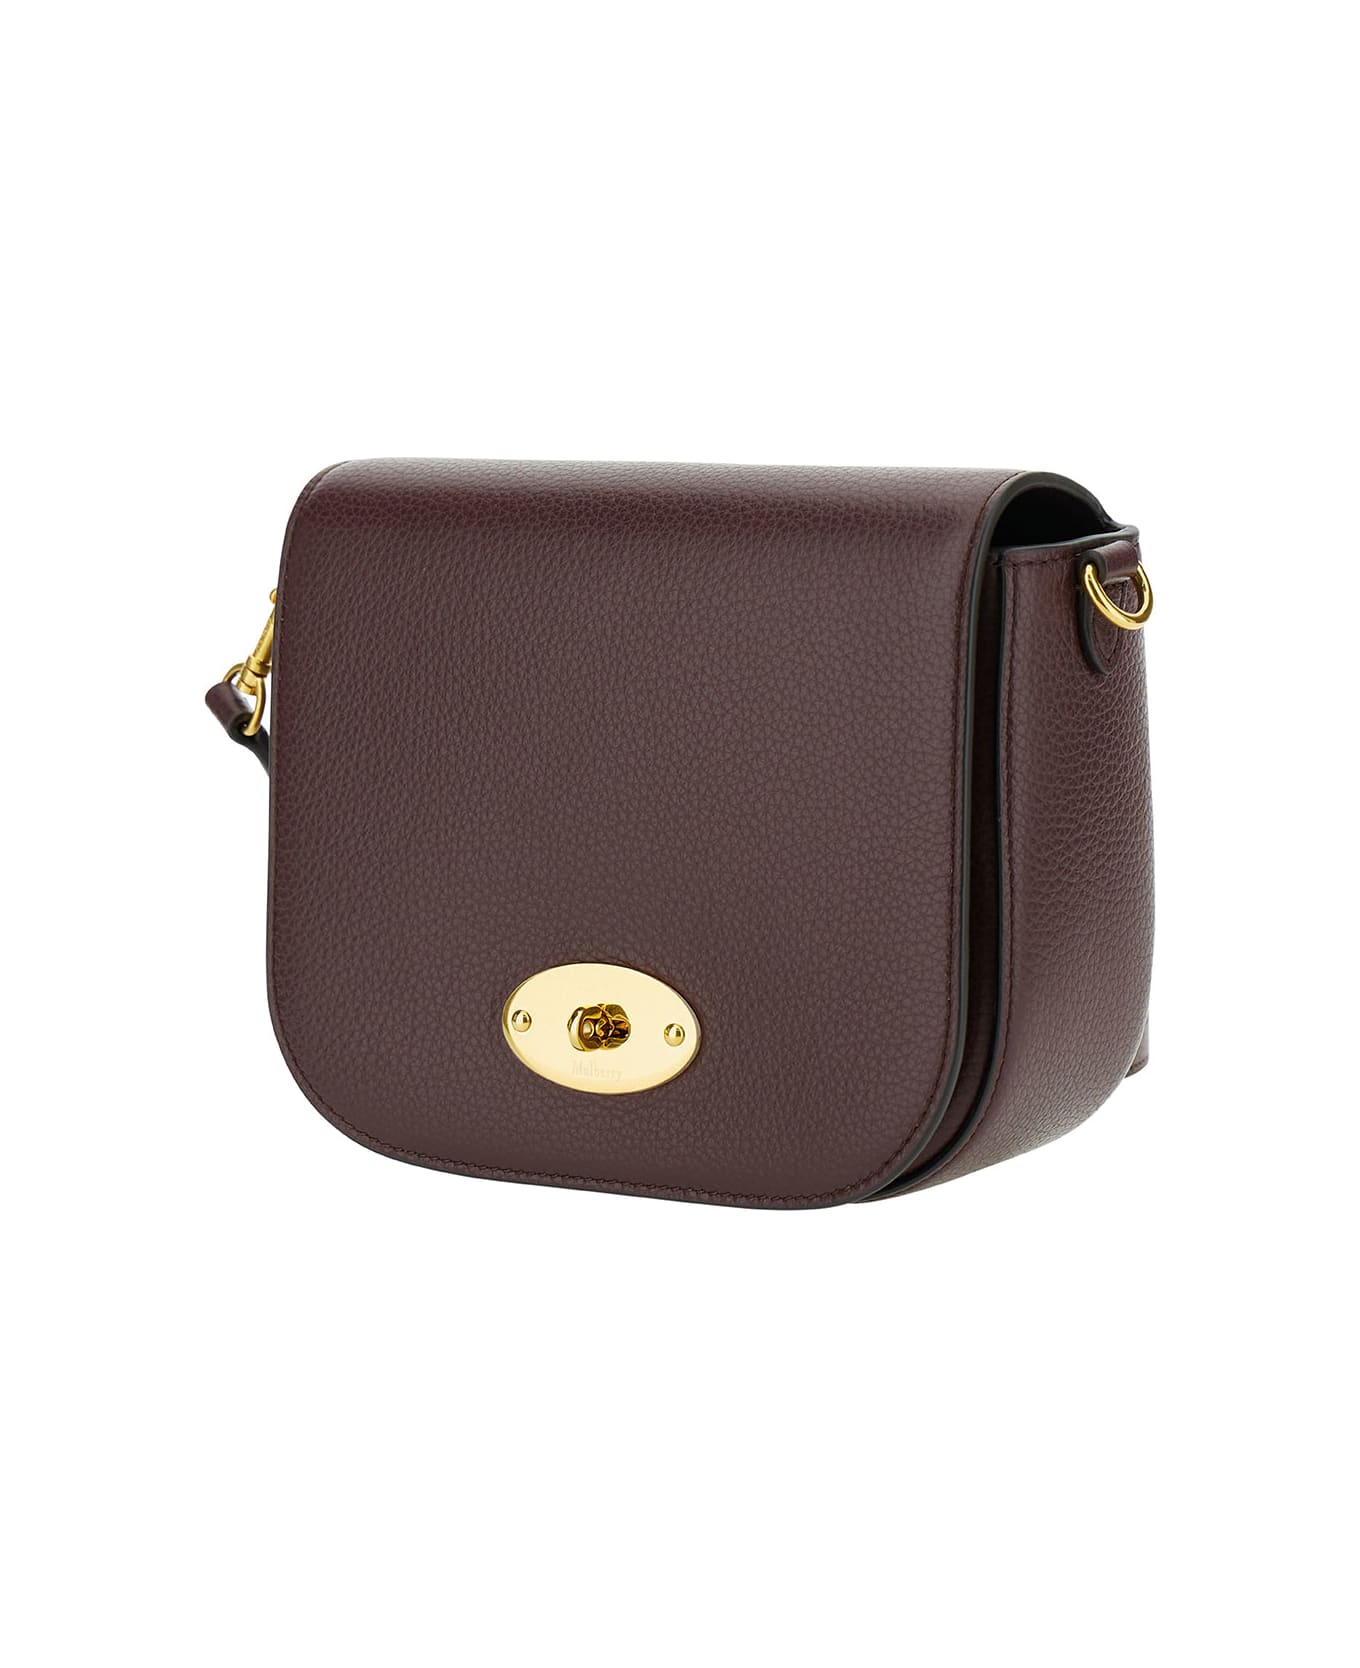 Mulberry Brown Crossbody Bag With Engraved Logo Detail In Hammered Leather Woman - Brown